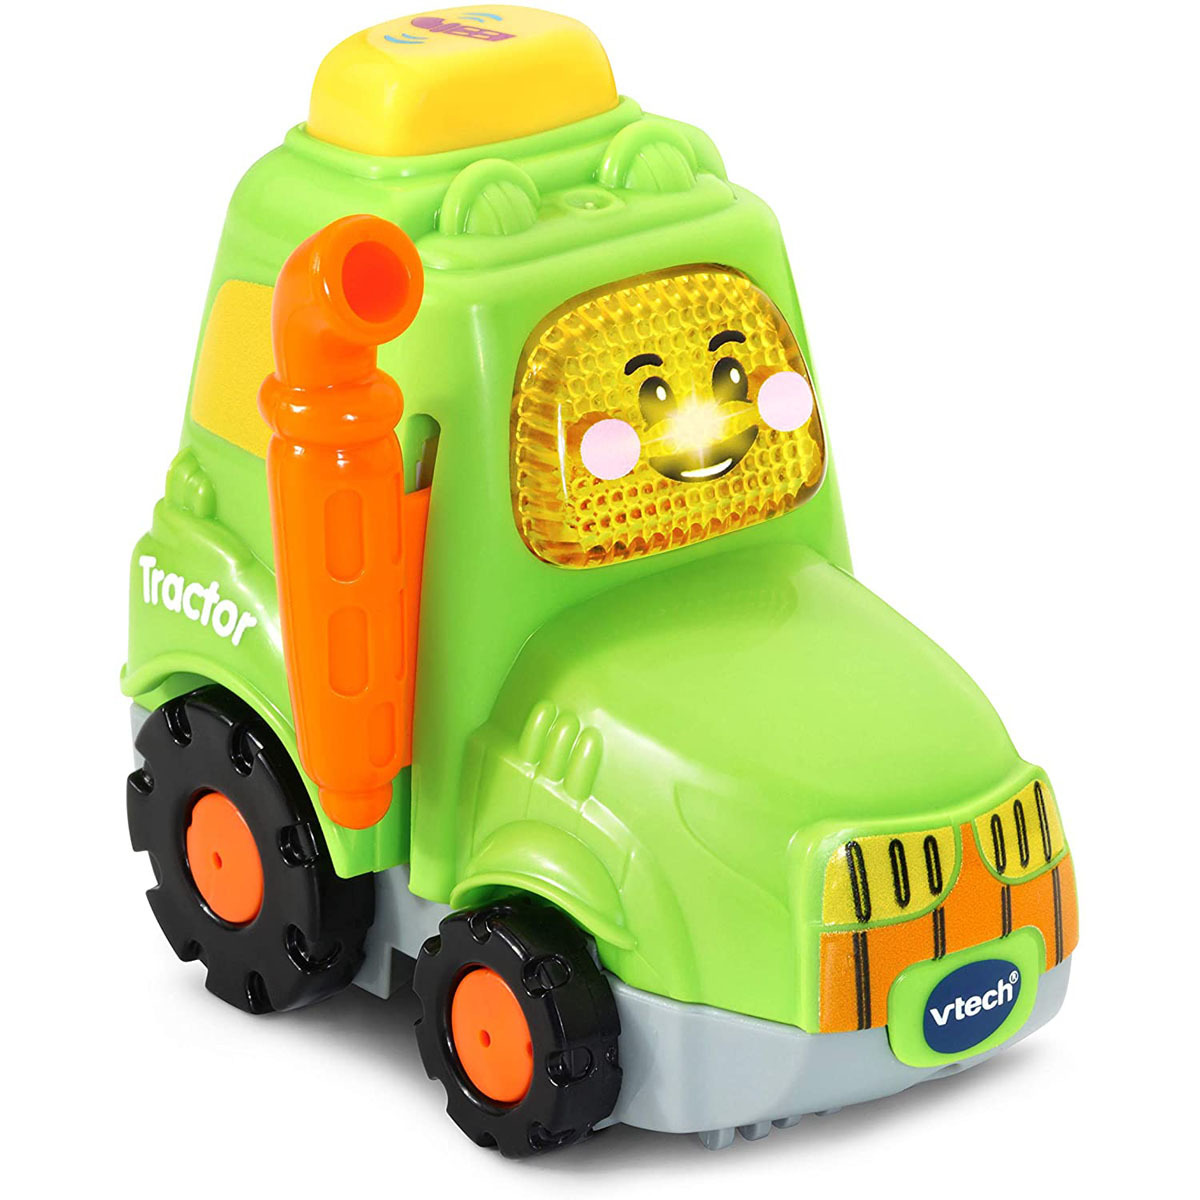 VTECH TOOT TOOT DRIVERS TRACTOR BRAND NEW IN BOX FOR AGES 12 MONTHS 2019 